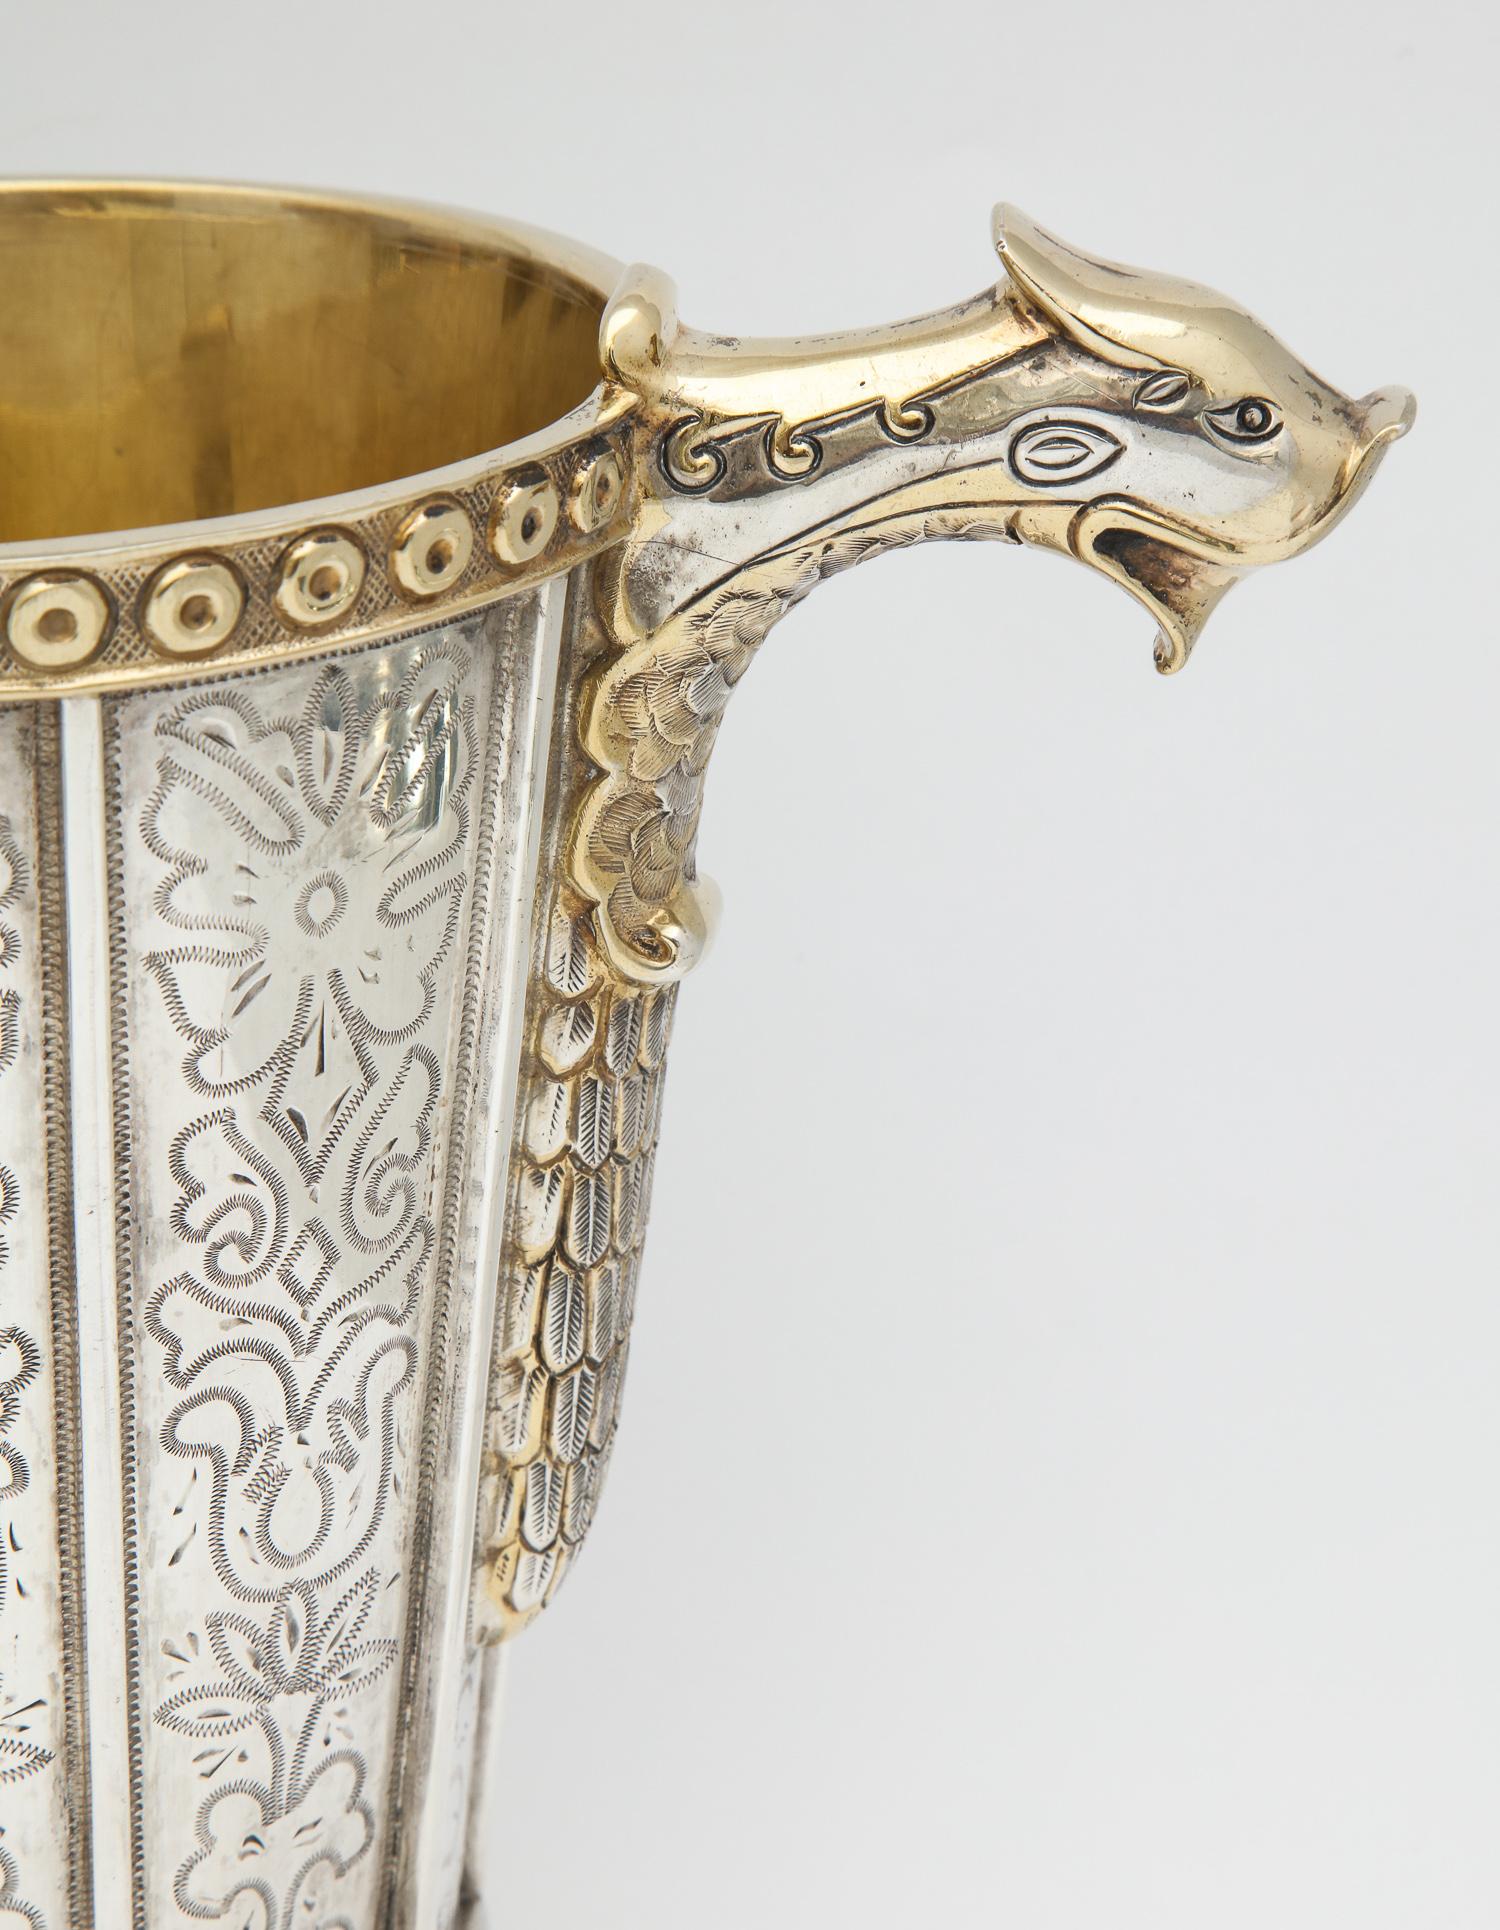 Quetzalcoatl-Inspired Sterling Silver Gilt Pitcher by Tane 9